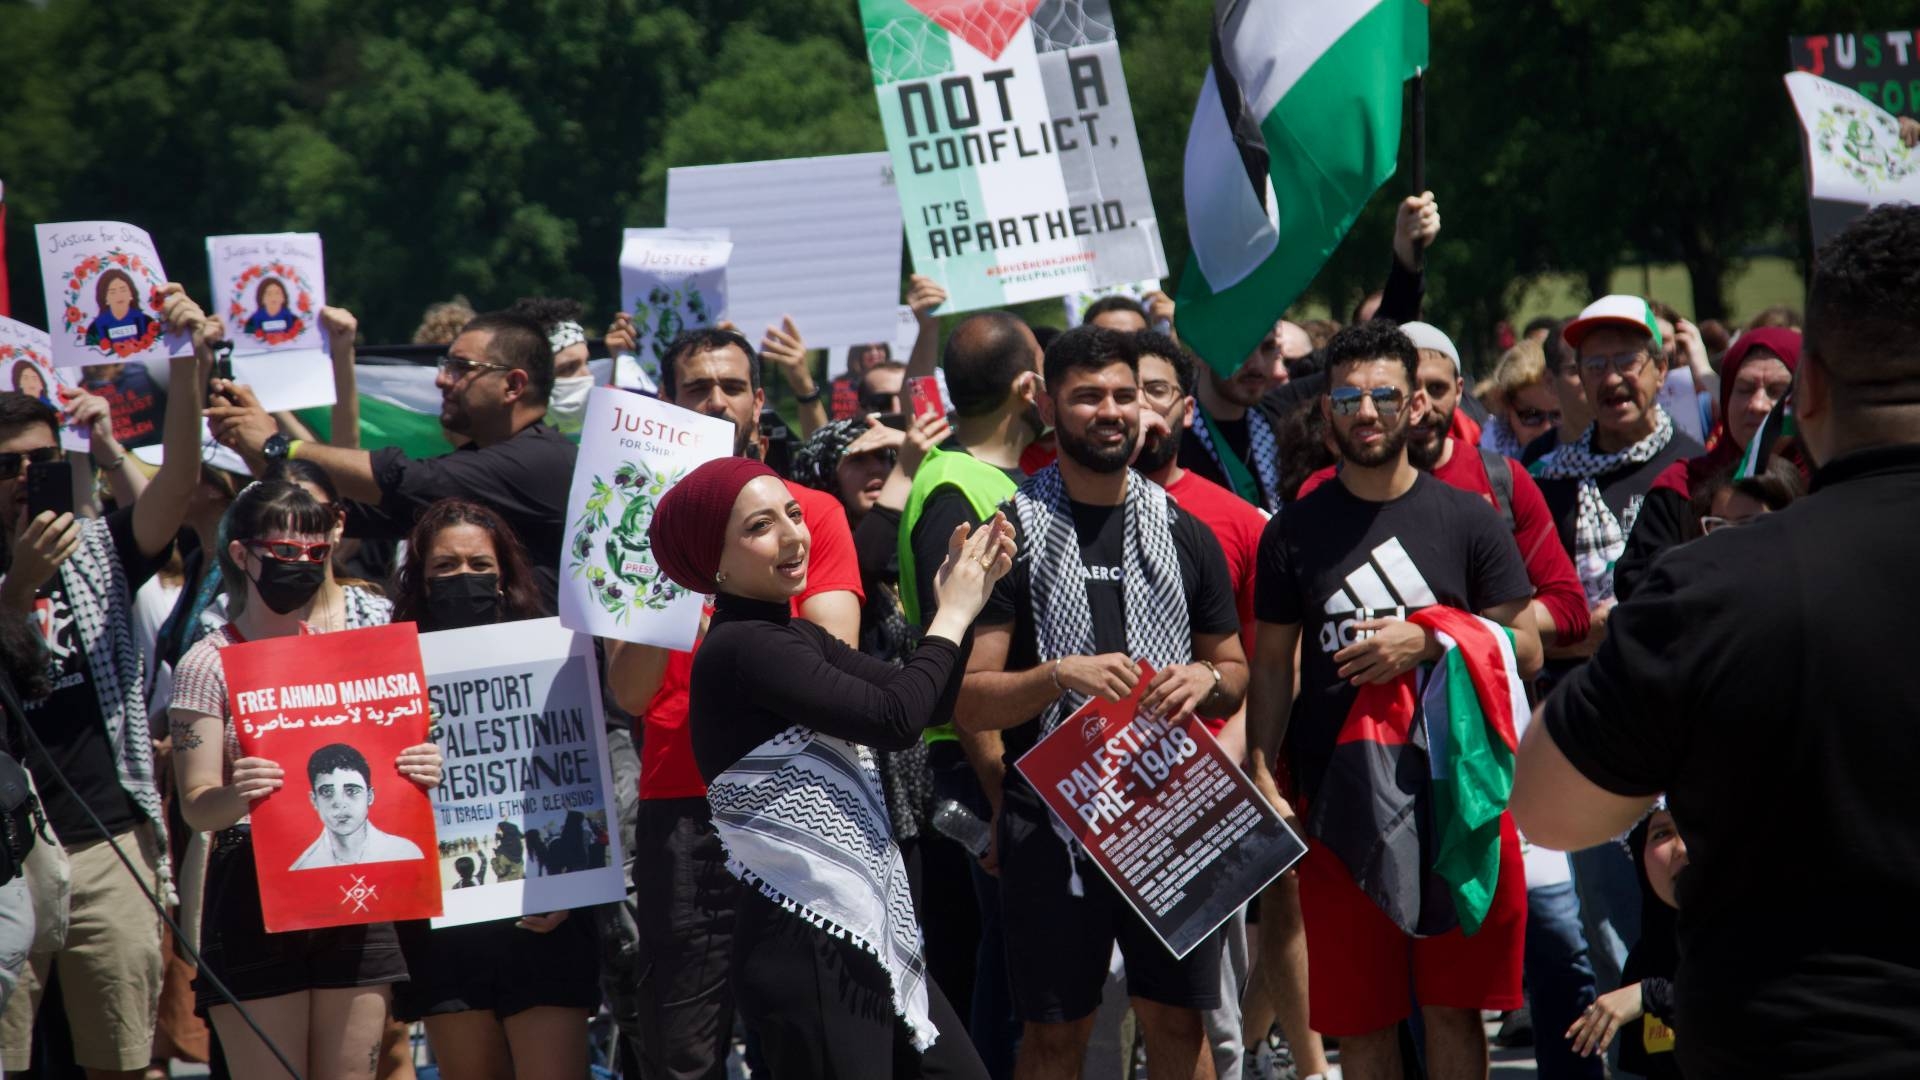 Pro-Palestinian activists gather in Washington on 15 May 2022 to commemorate the anniversary of the Nakba, the forced expulsion of Palestinians from their homes by Zionist paramilitaries.